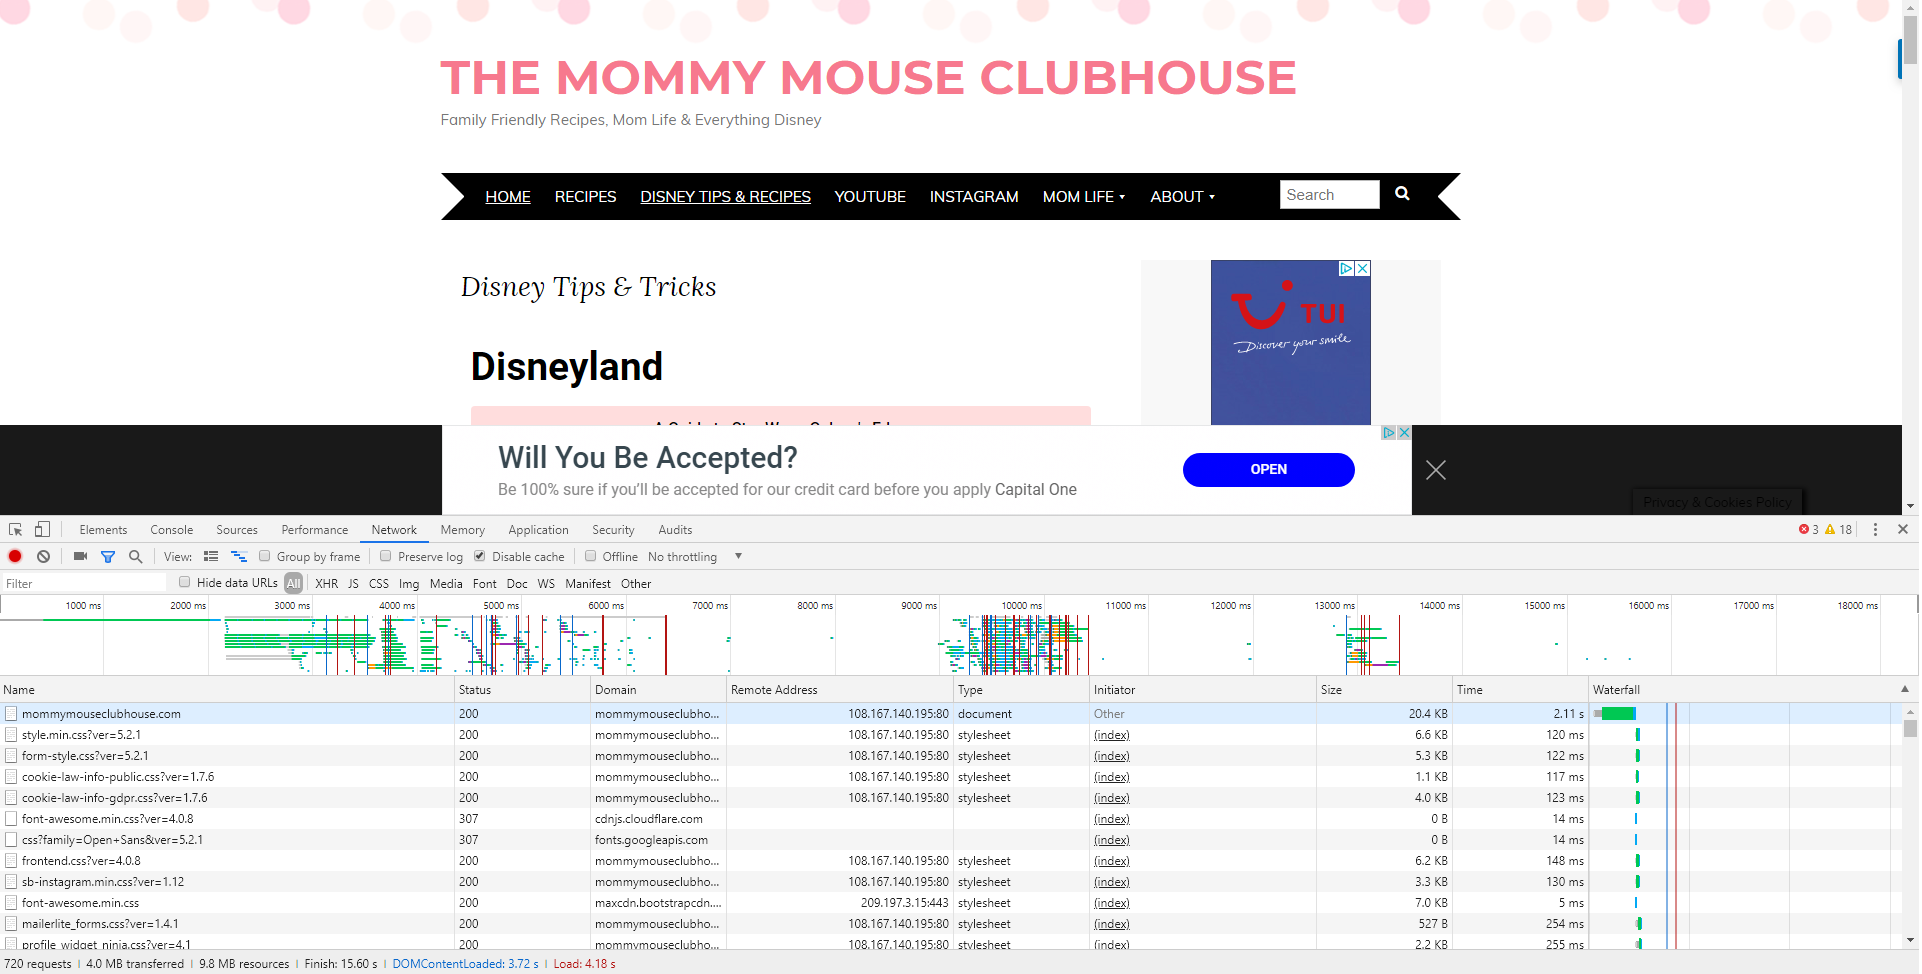 www.mommymouseclubhouse.com Speed Comparison Before